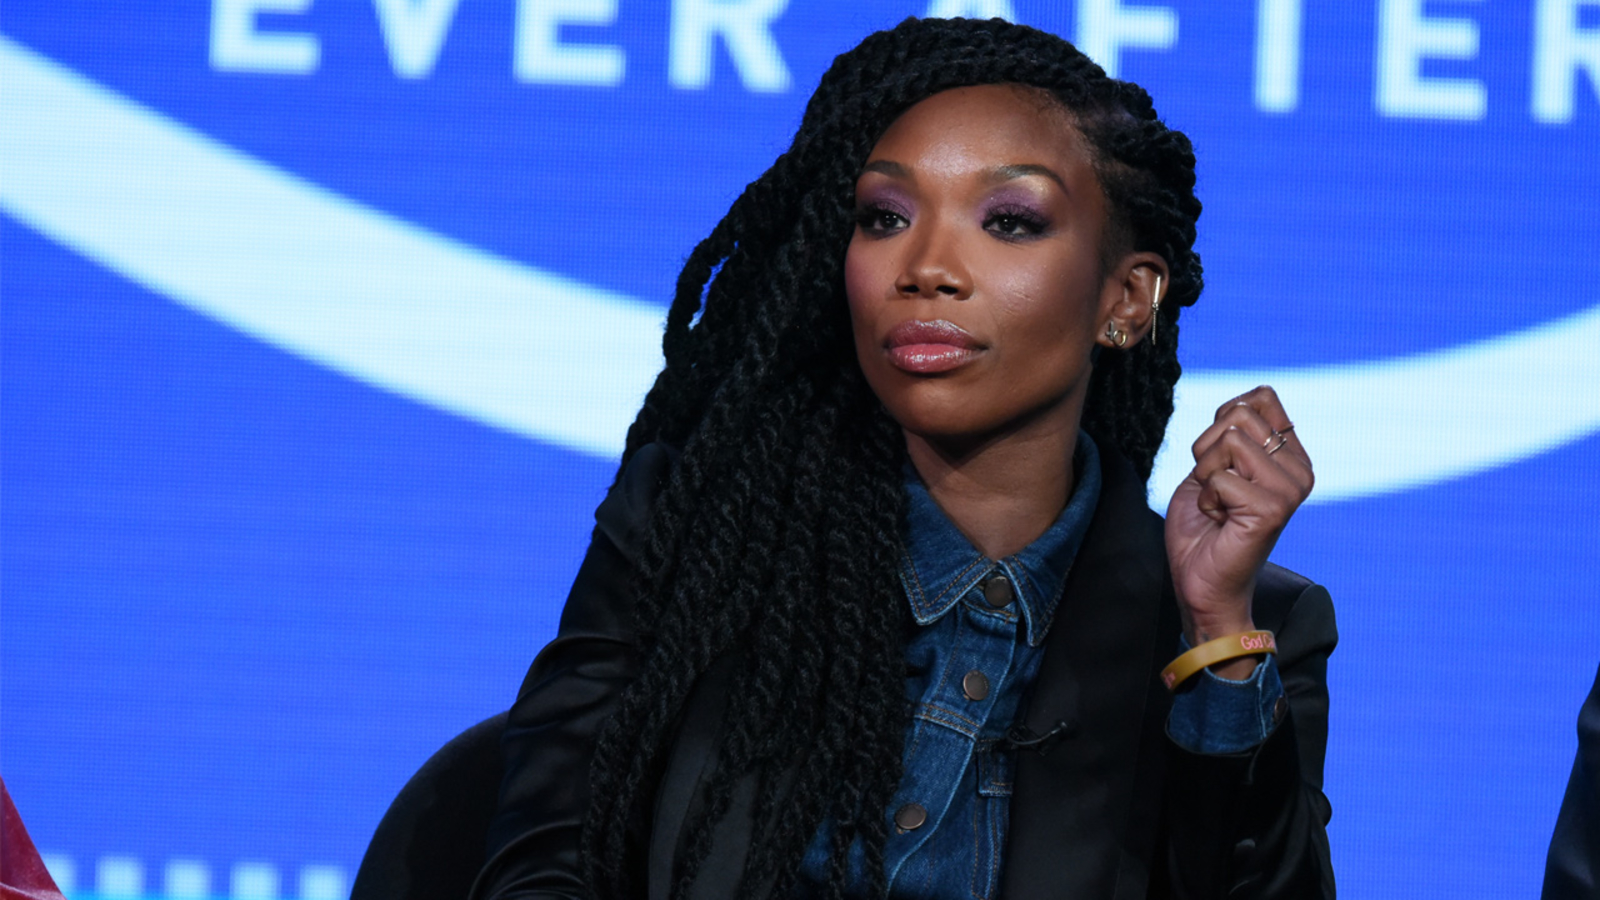 Singer Brandy hospitalized after apparently losing consciousness on plane at LAX